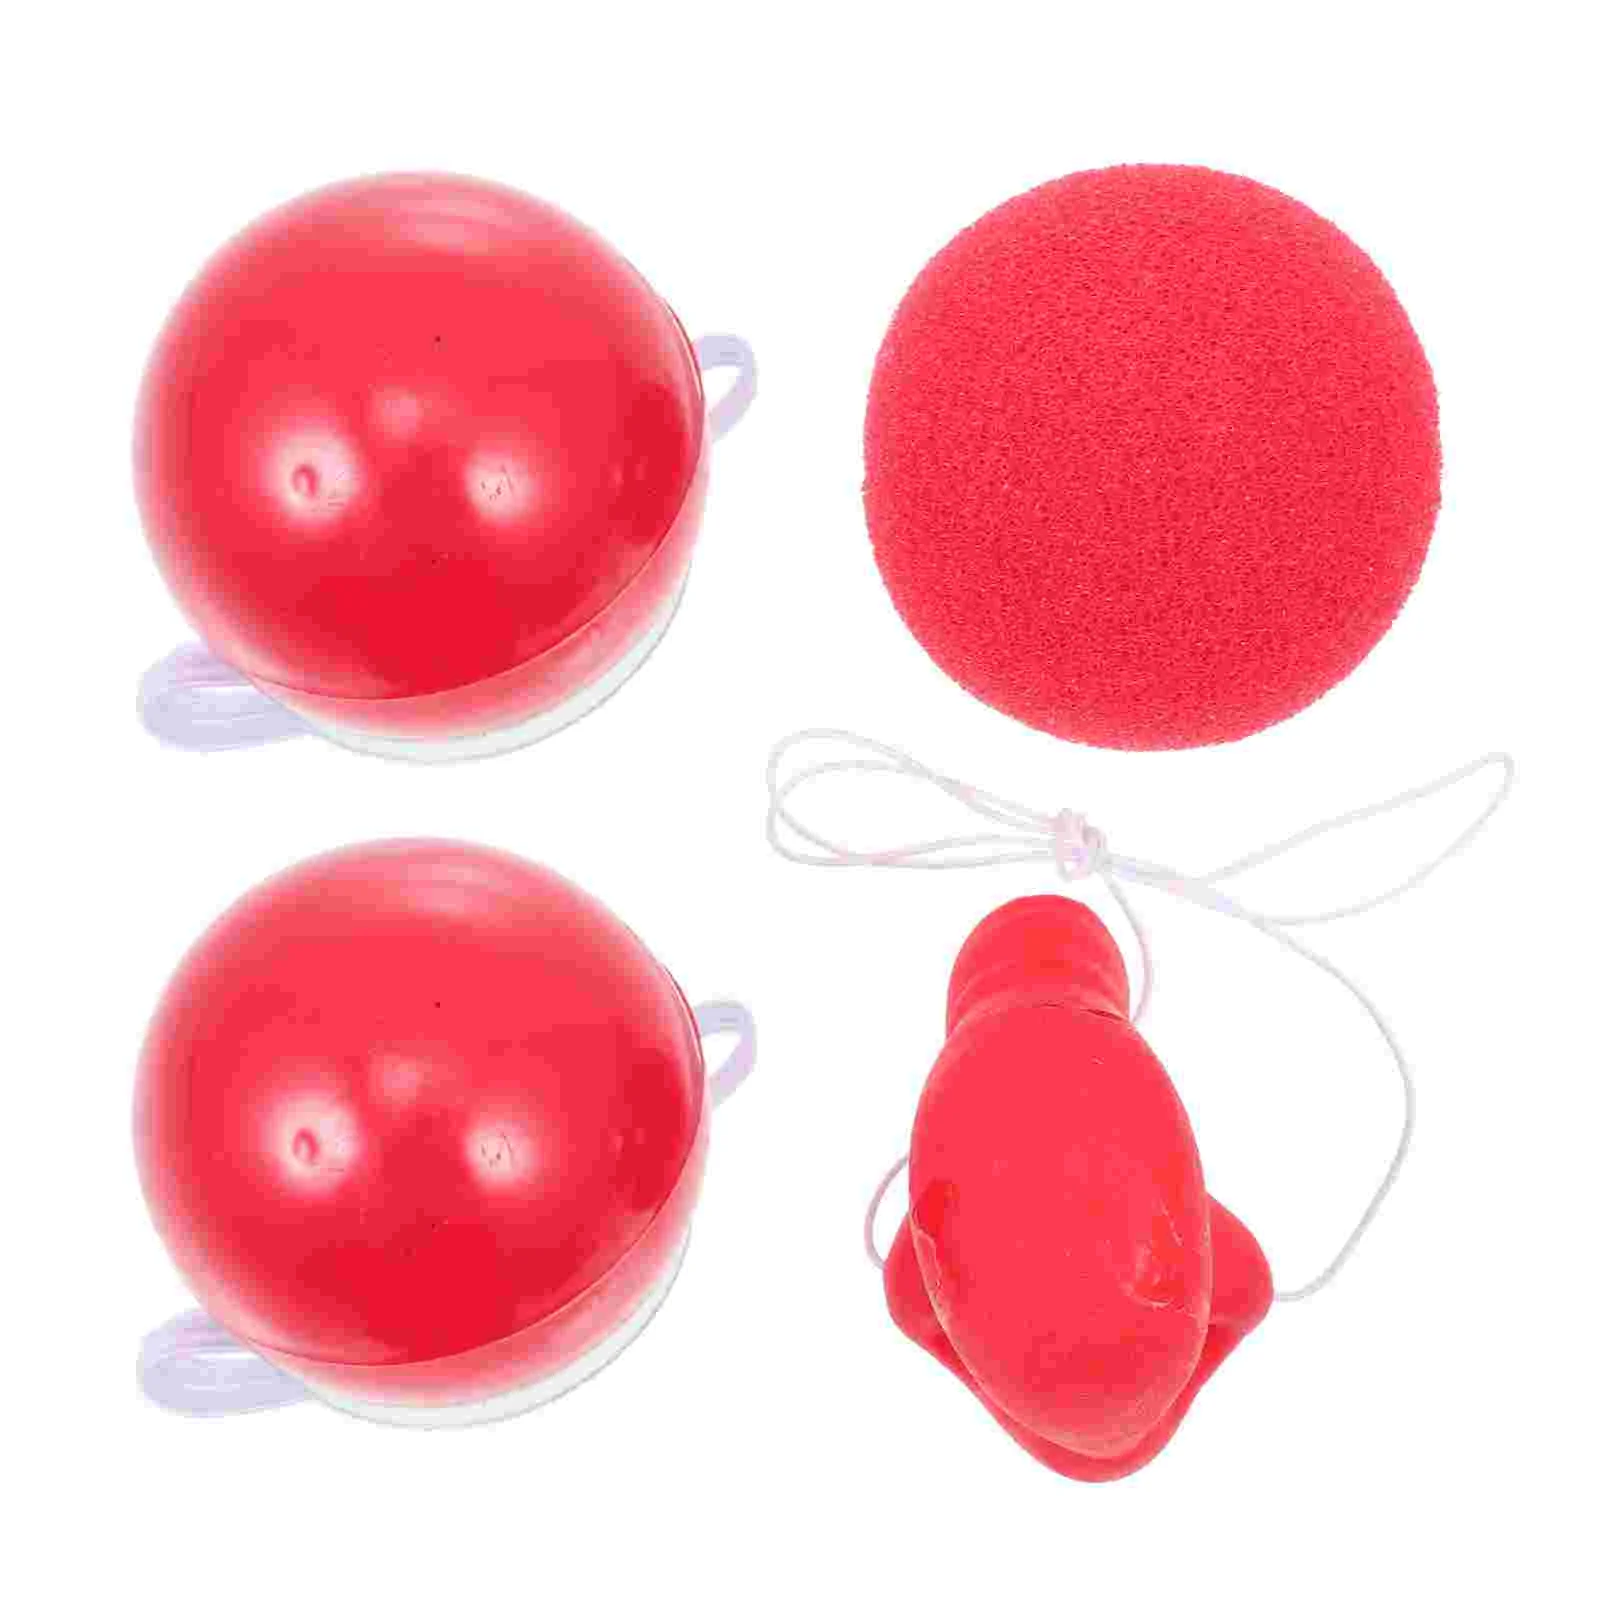 

Clown Nose Red Noses Prop Sponge Cosplay Circus Party Carnival Costume Kids Glowing Accessory Performance Bulk Masquerade Up